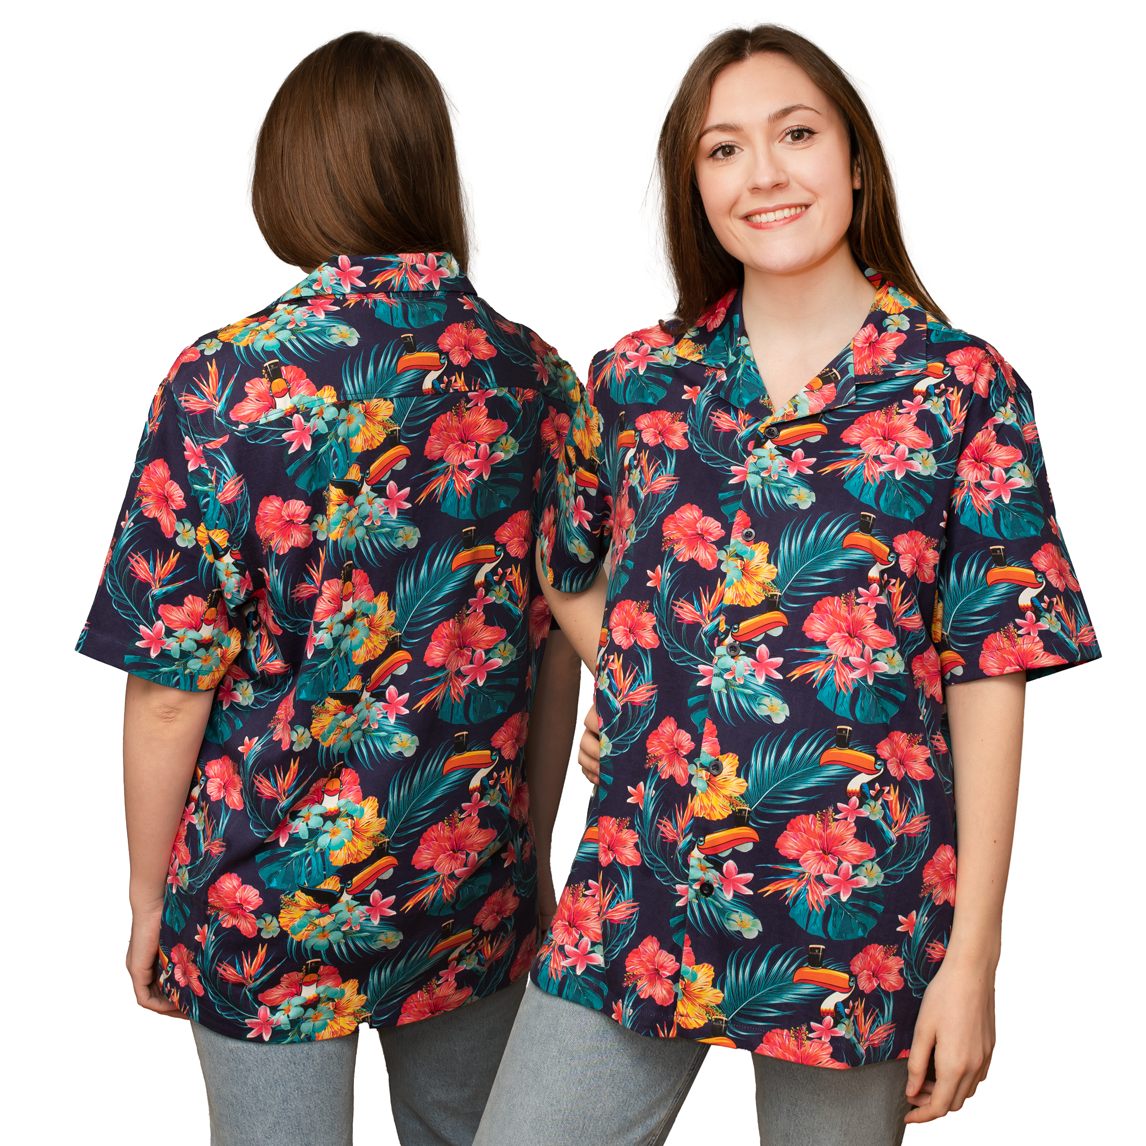 A woman donning a vibrant Guinness Toucan Hawaiian shirt adorned with tropical plants and flowers.